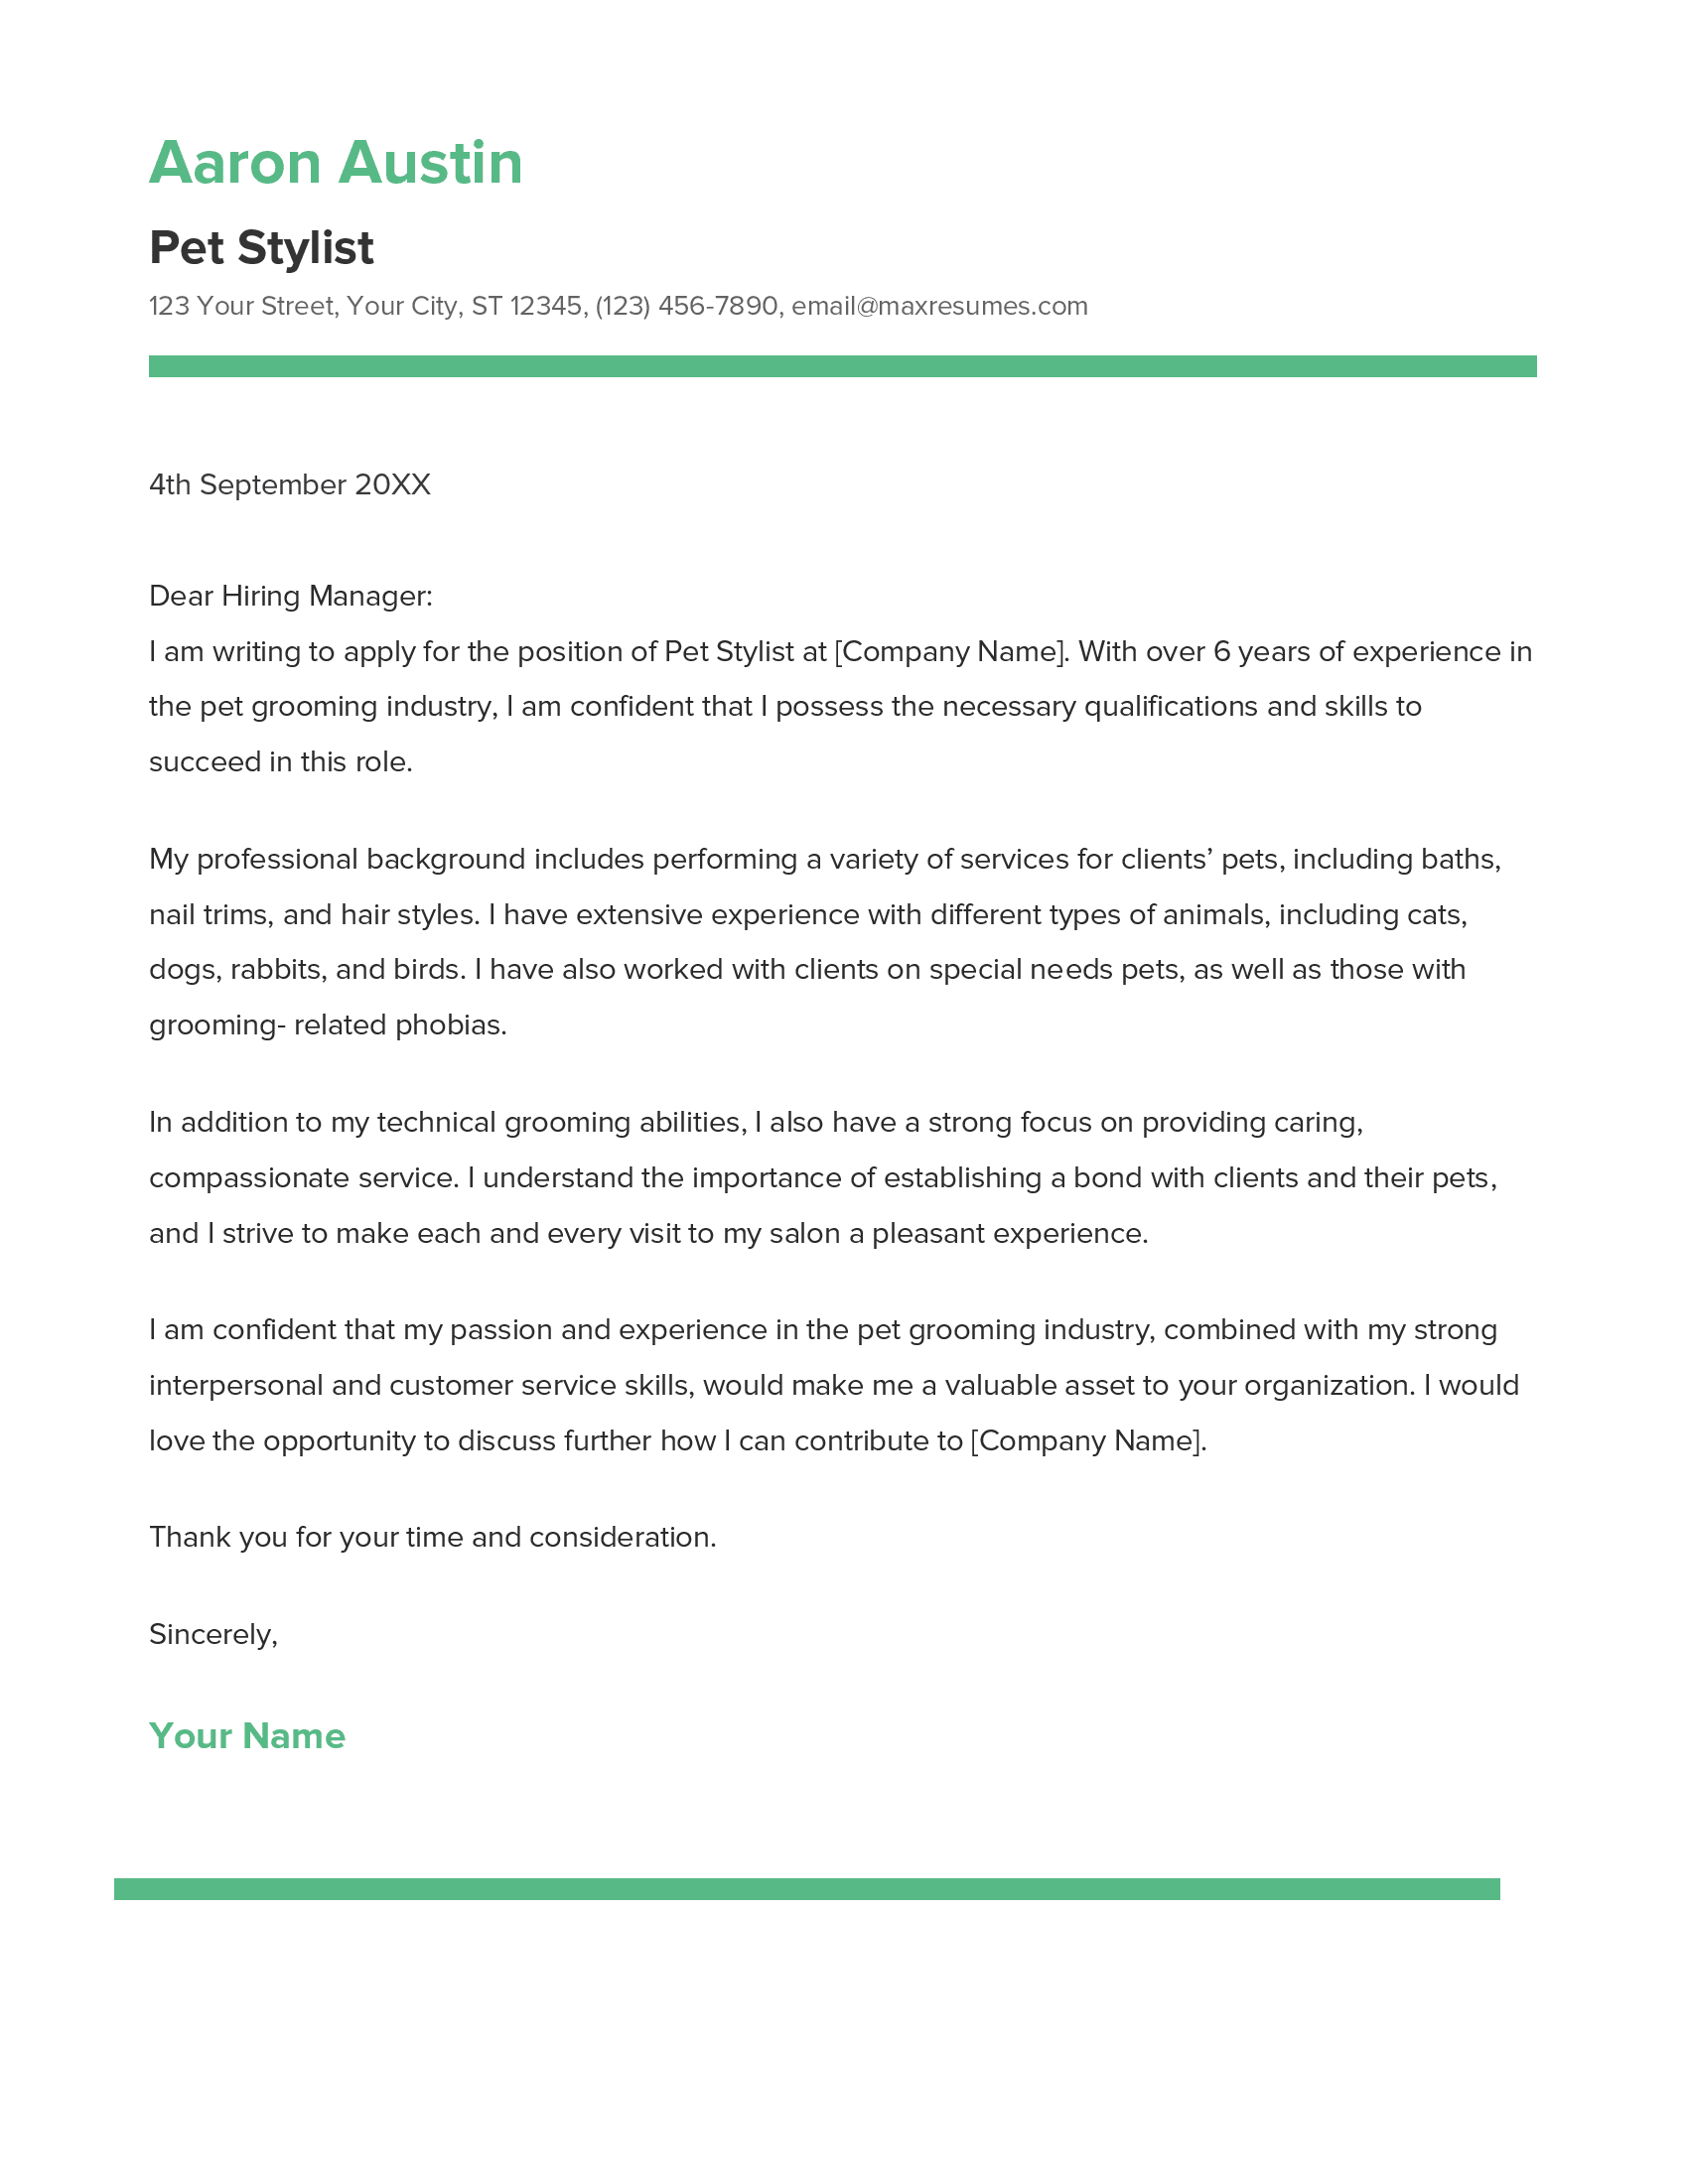 Pet Stylist Cover Letter Example